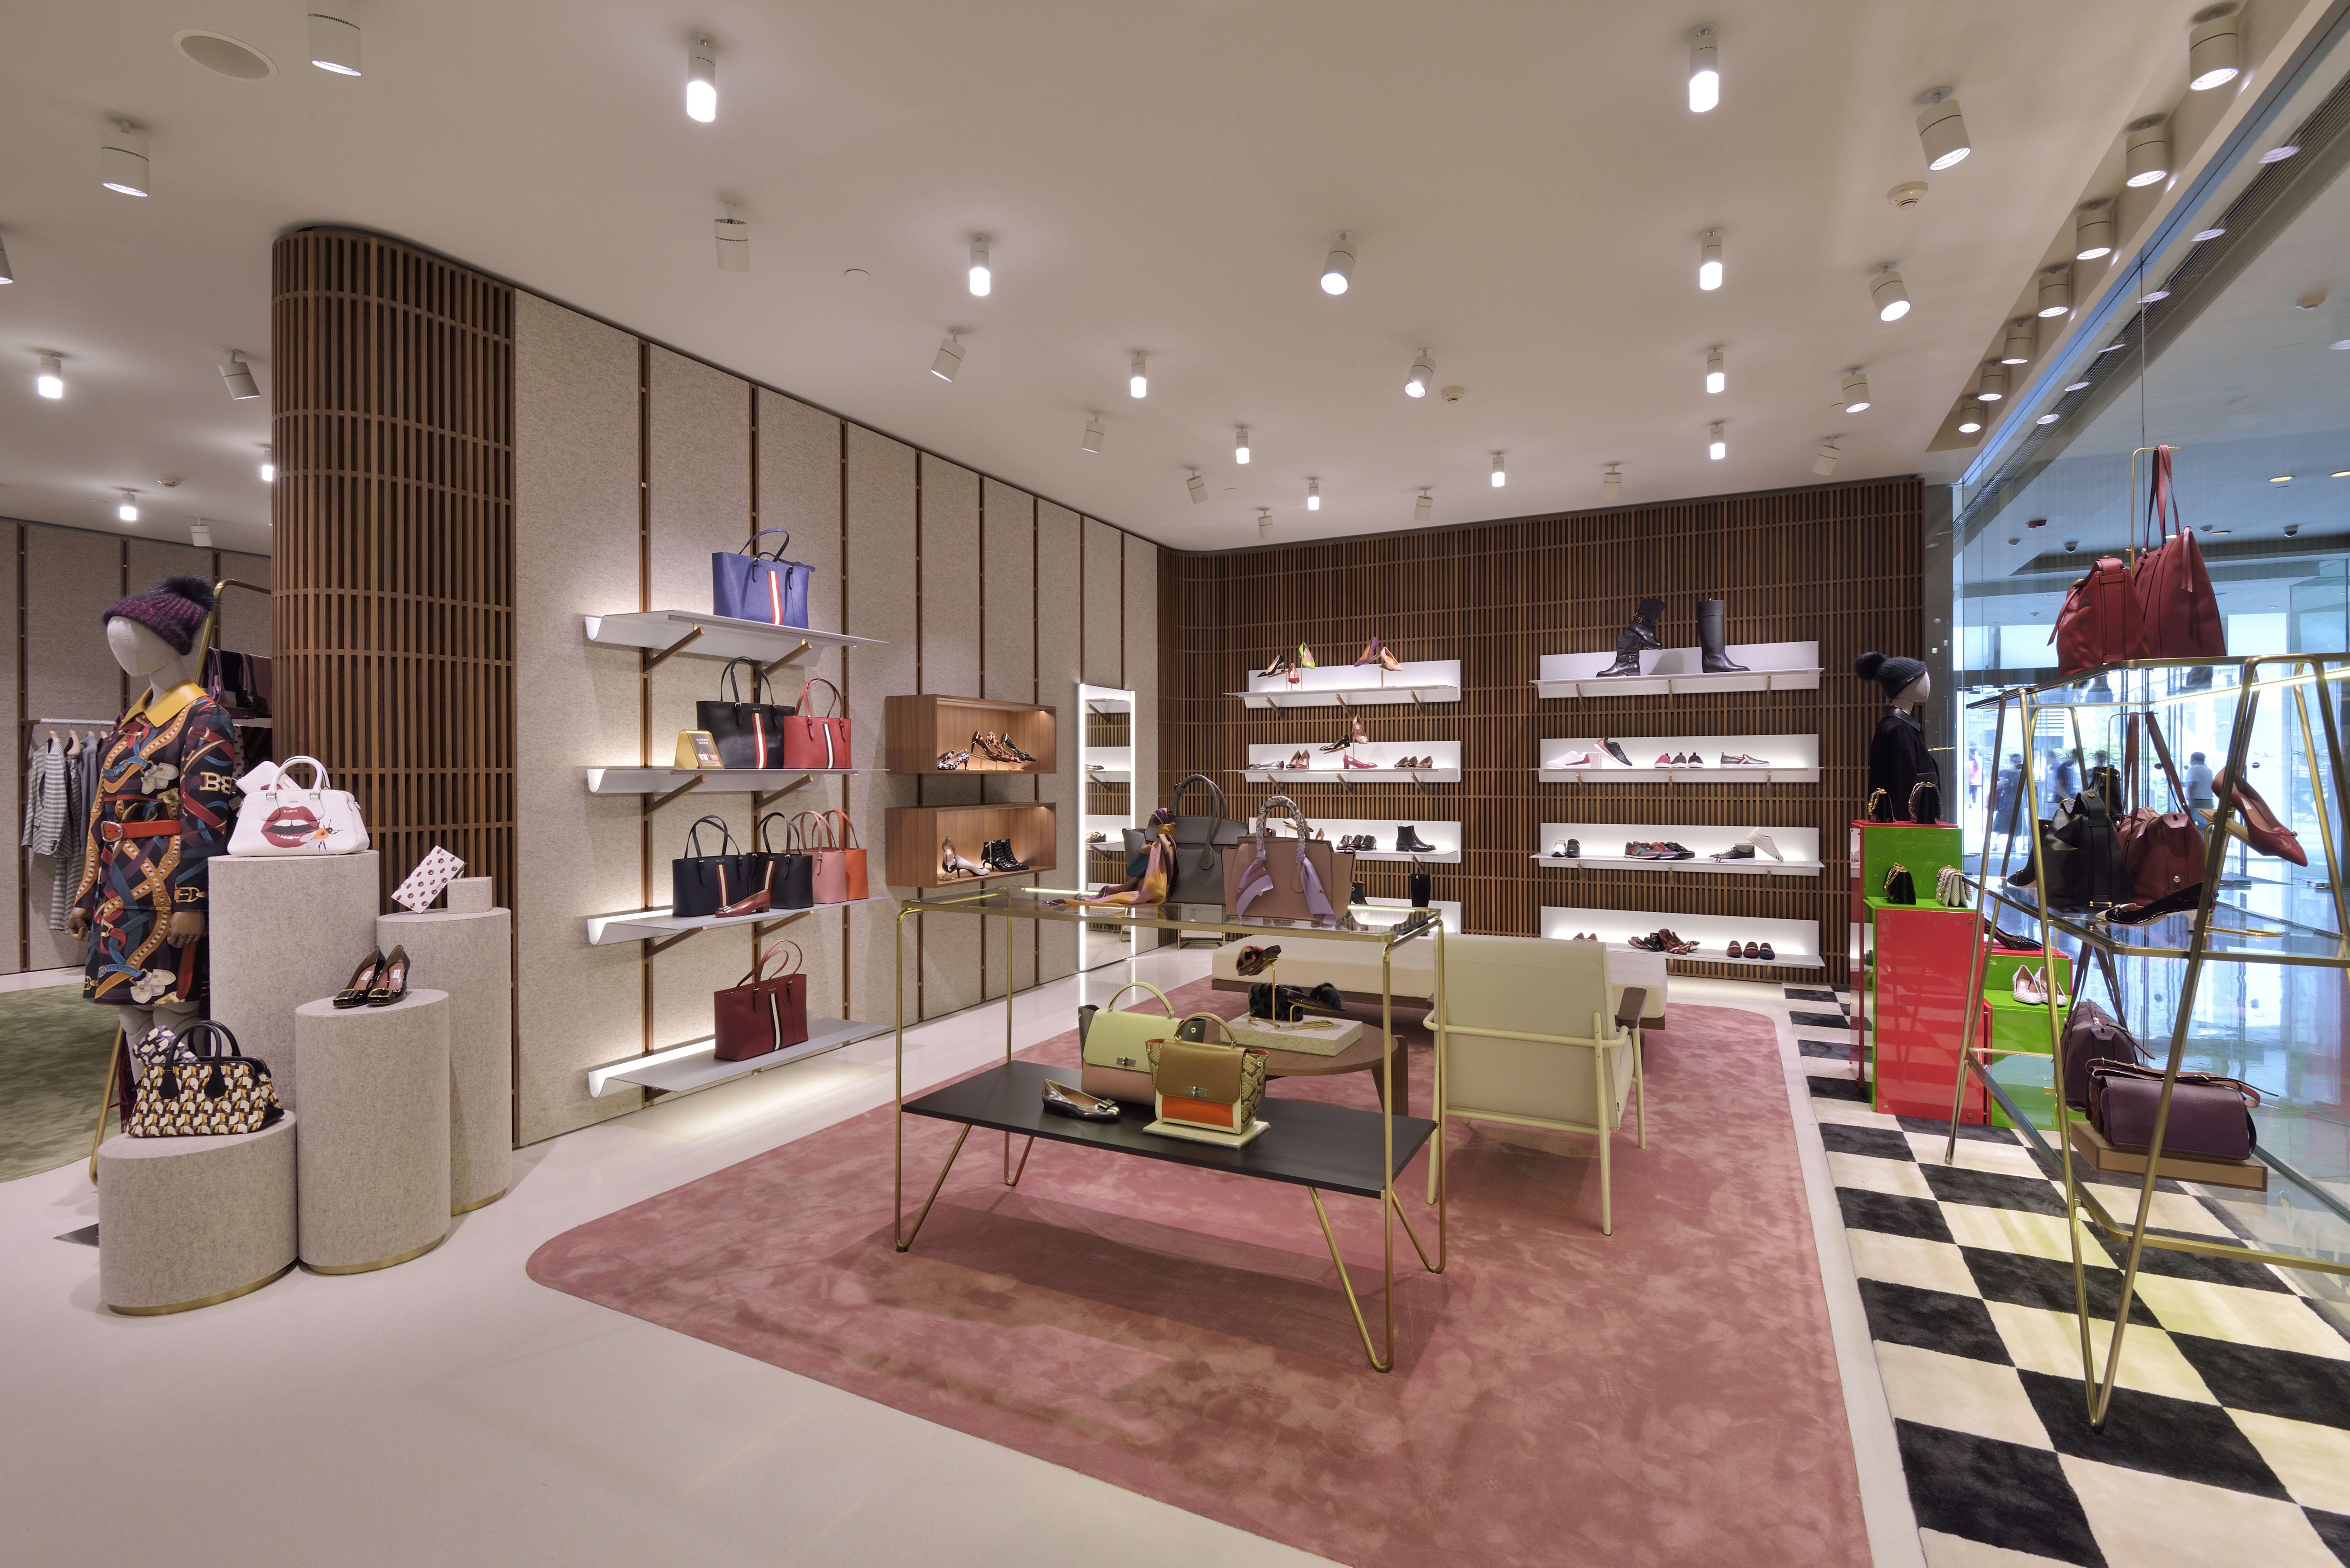 British architect David Chipperfield revived Bally's modernist design heritage in the latest Shanghai Bally store.